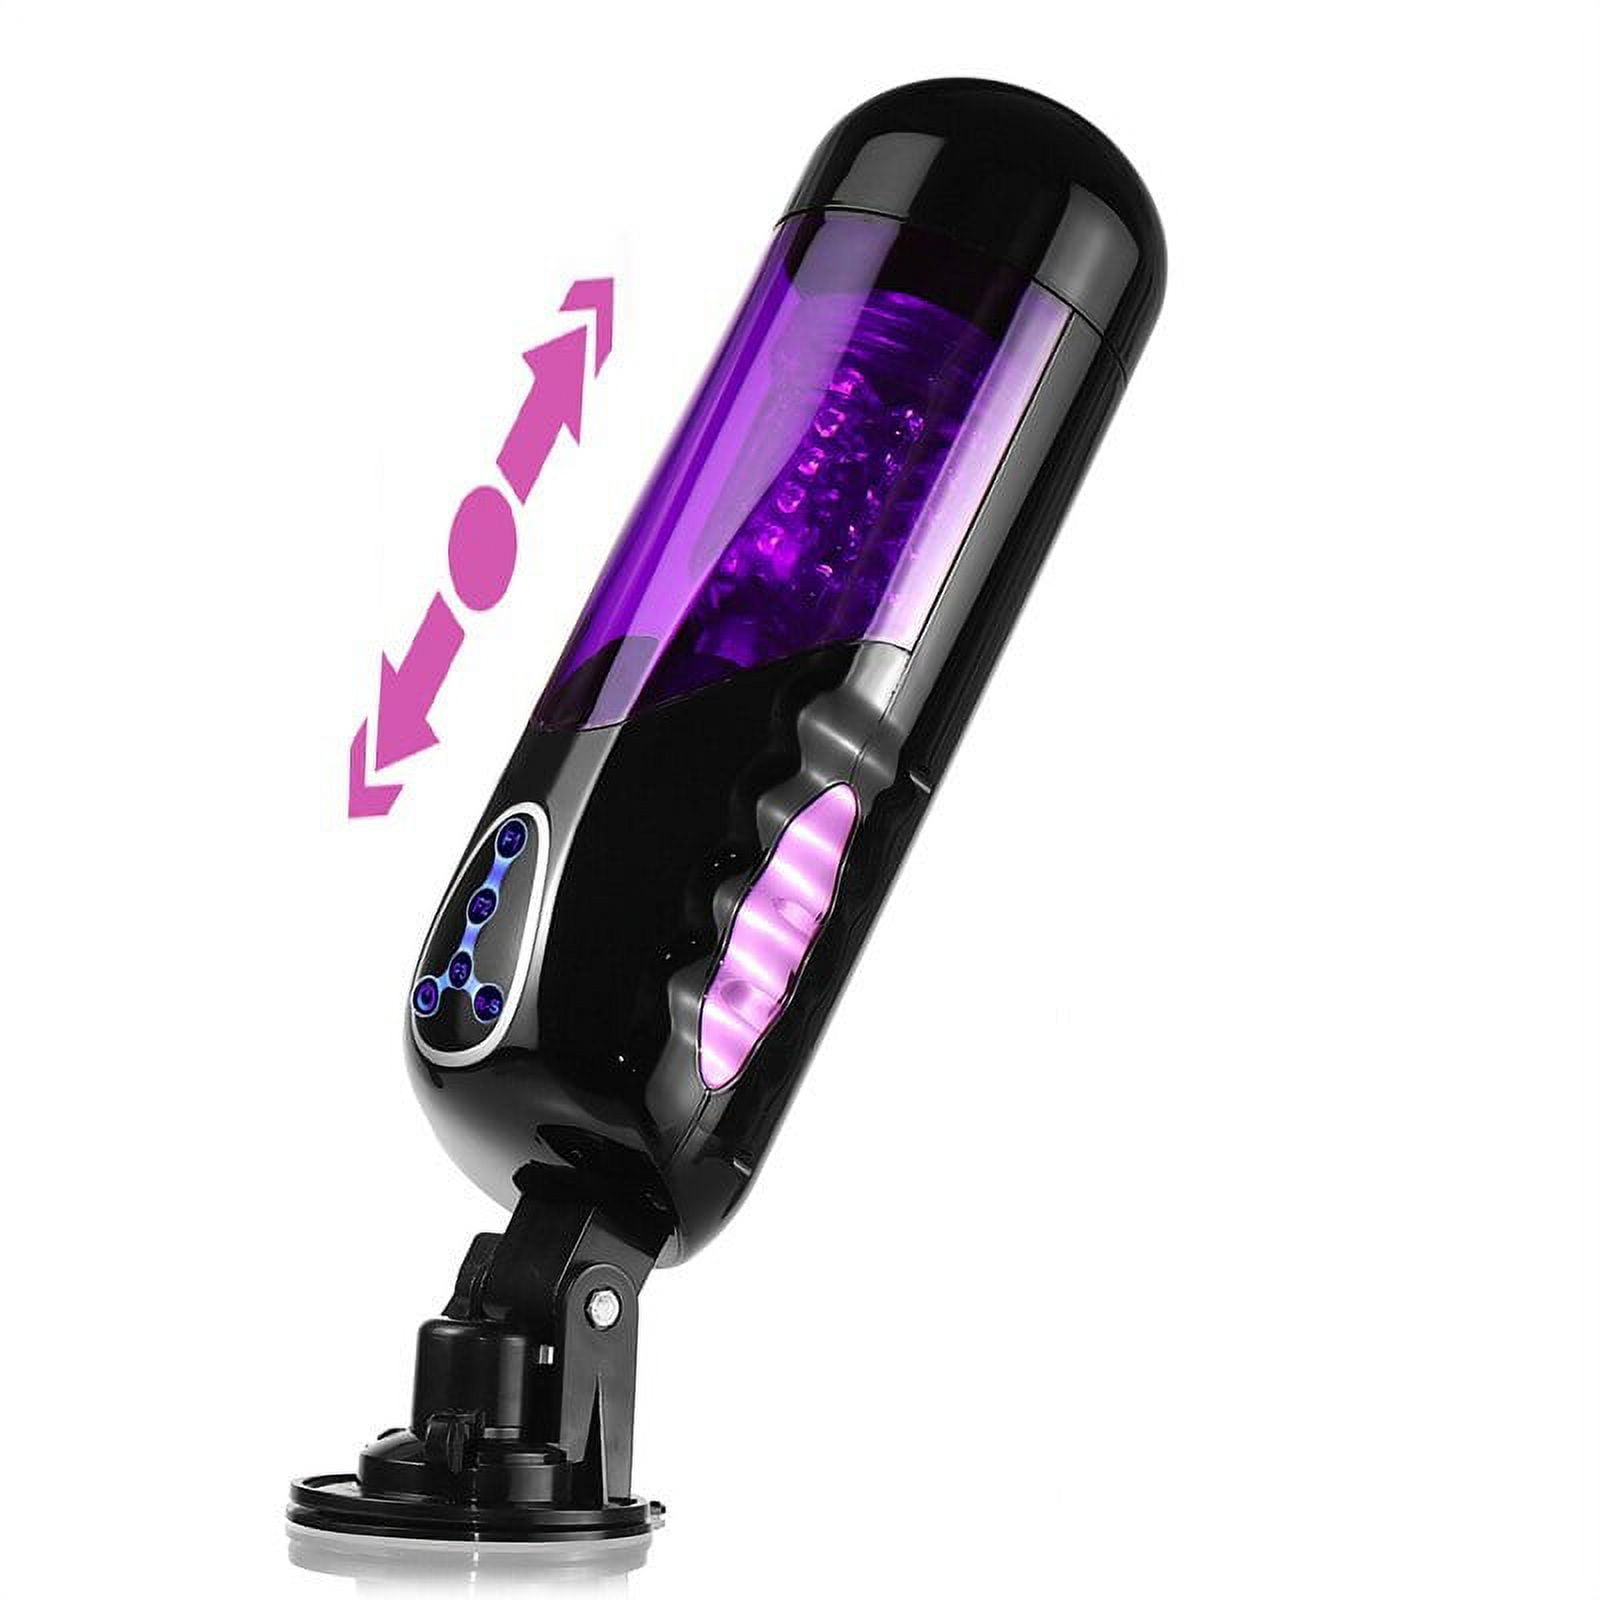 Automatic Male Masturbator Cup, Multi Vibration 10 Thrusting 10 Rotating Intelligent Heating Patterns, with Womens Voice Suction Base Handsfree Electric Pocket Stroker Adult Sex Toys for